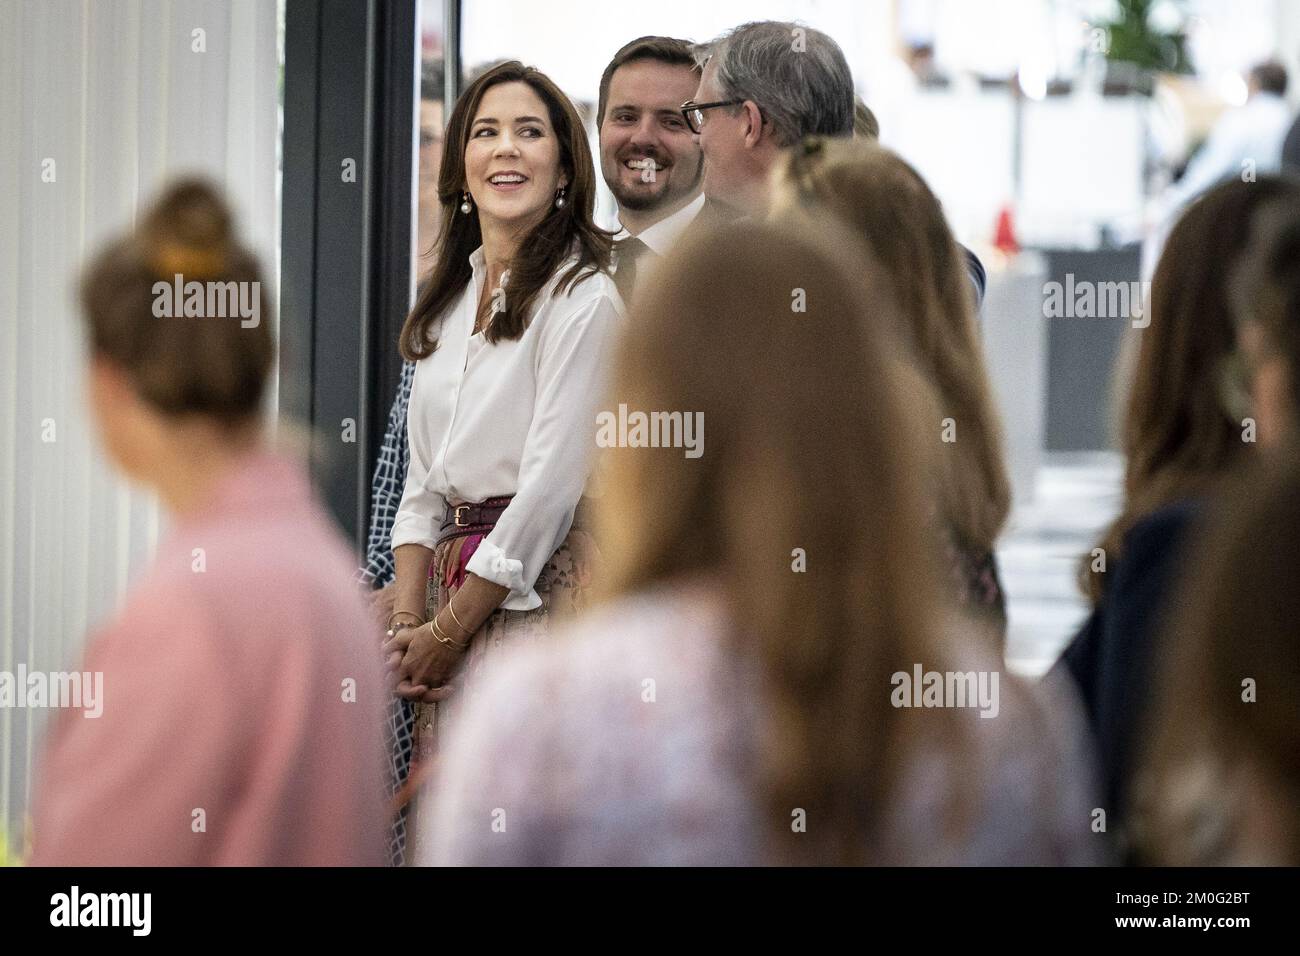 Crown Princess Mary attended Creative Denmark's launch event 'Creative Summit' at Industriens Hus in Copenhagen. Wednesday, June 23, 2021. Dansk Industri (The Confederation of Danish Industry) and Creative Denmark want to create a platform that focuses on the growth potential in the creative industries, while at the same time facilitating knowledge and networking opportunities where creative actors can be inspired by each other's business areas and models. With her participation, Crown Princess Mary helped focus attention on talented Danish creative companies. (Photo: Mads Claus Rasmussen/Ritz Stock Photo